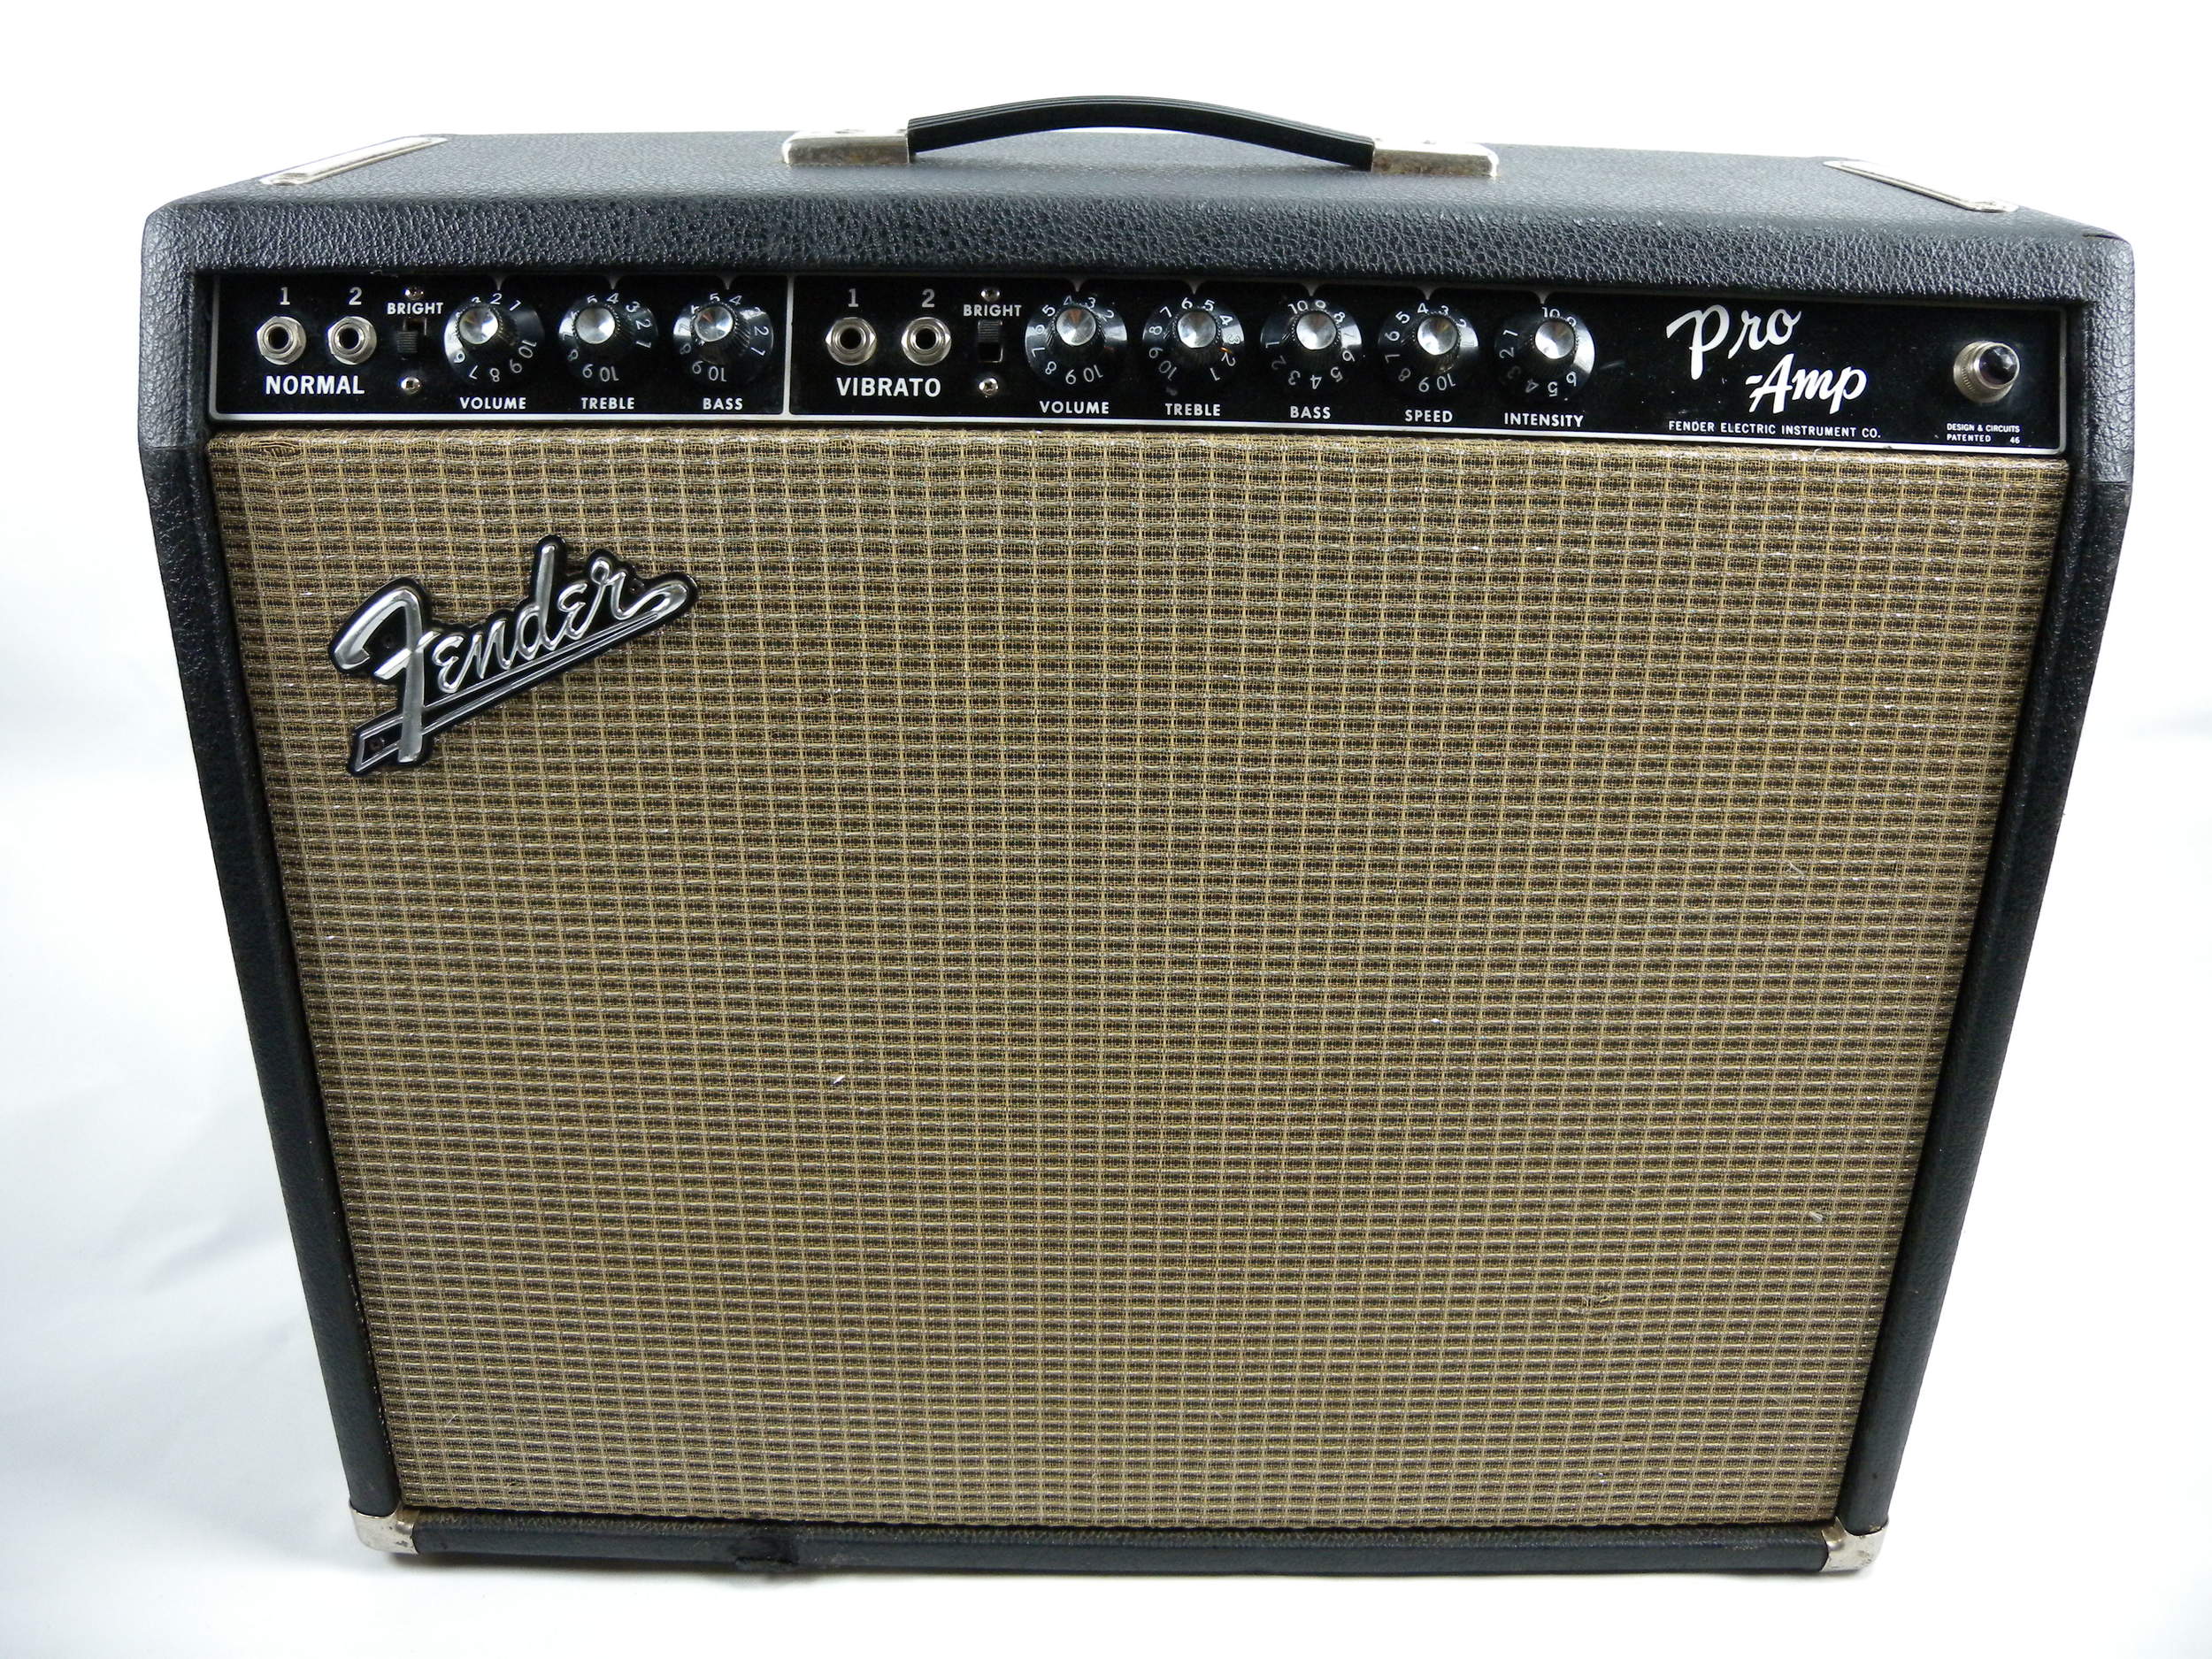 1963 Fender Pro Amp — Are you Dialed In?™ Dig it.